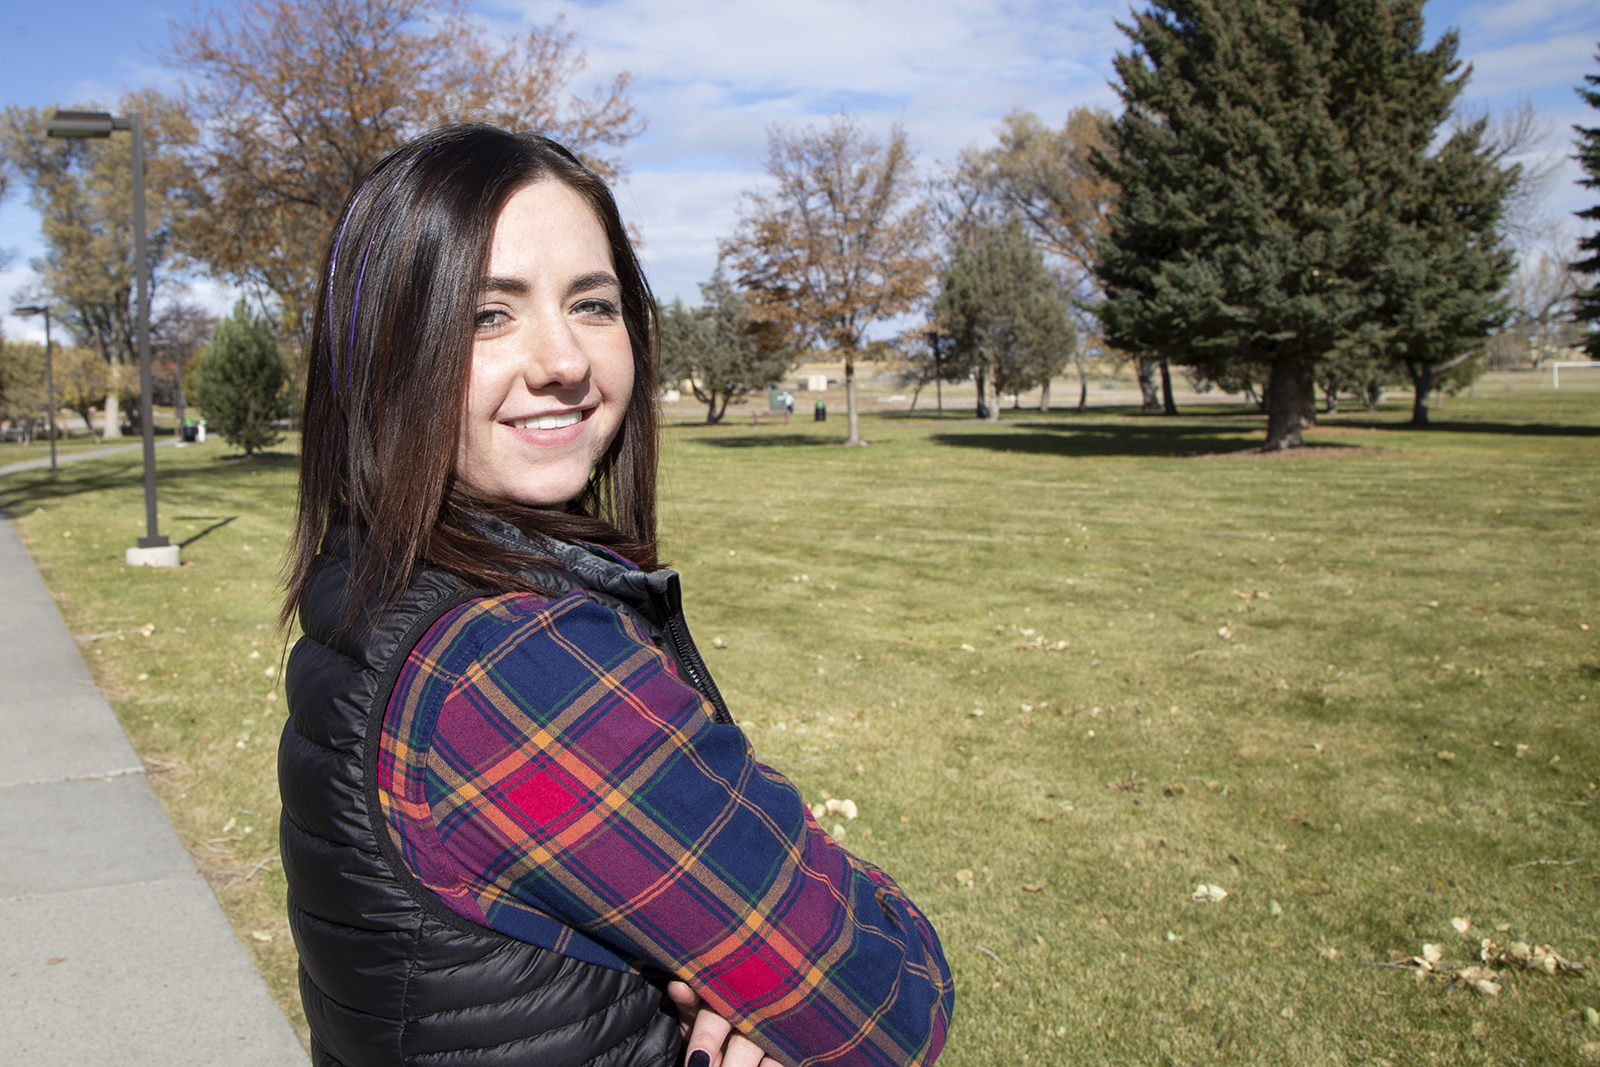 CWC student Abigail Arnold poses on the lawn of CWC